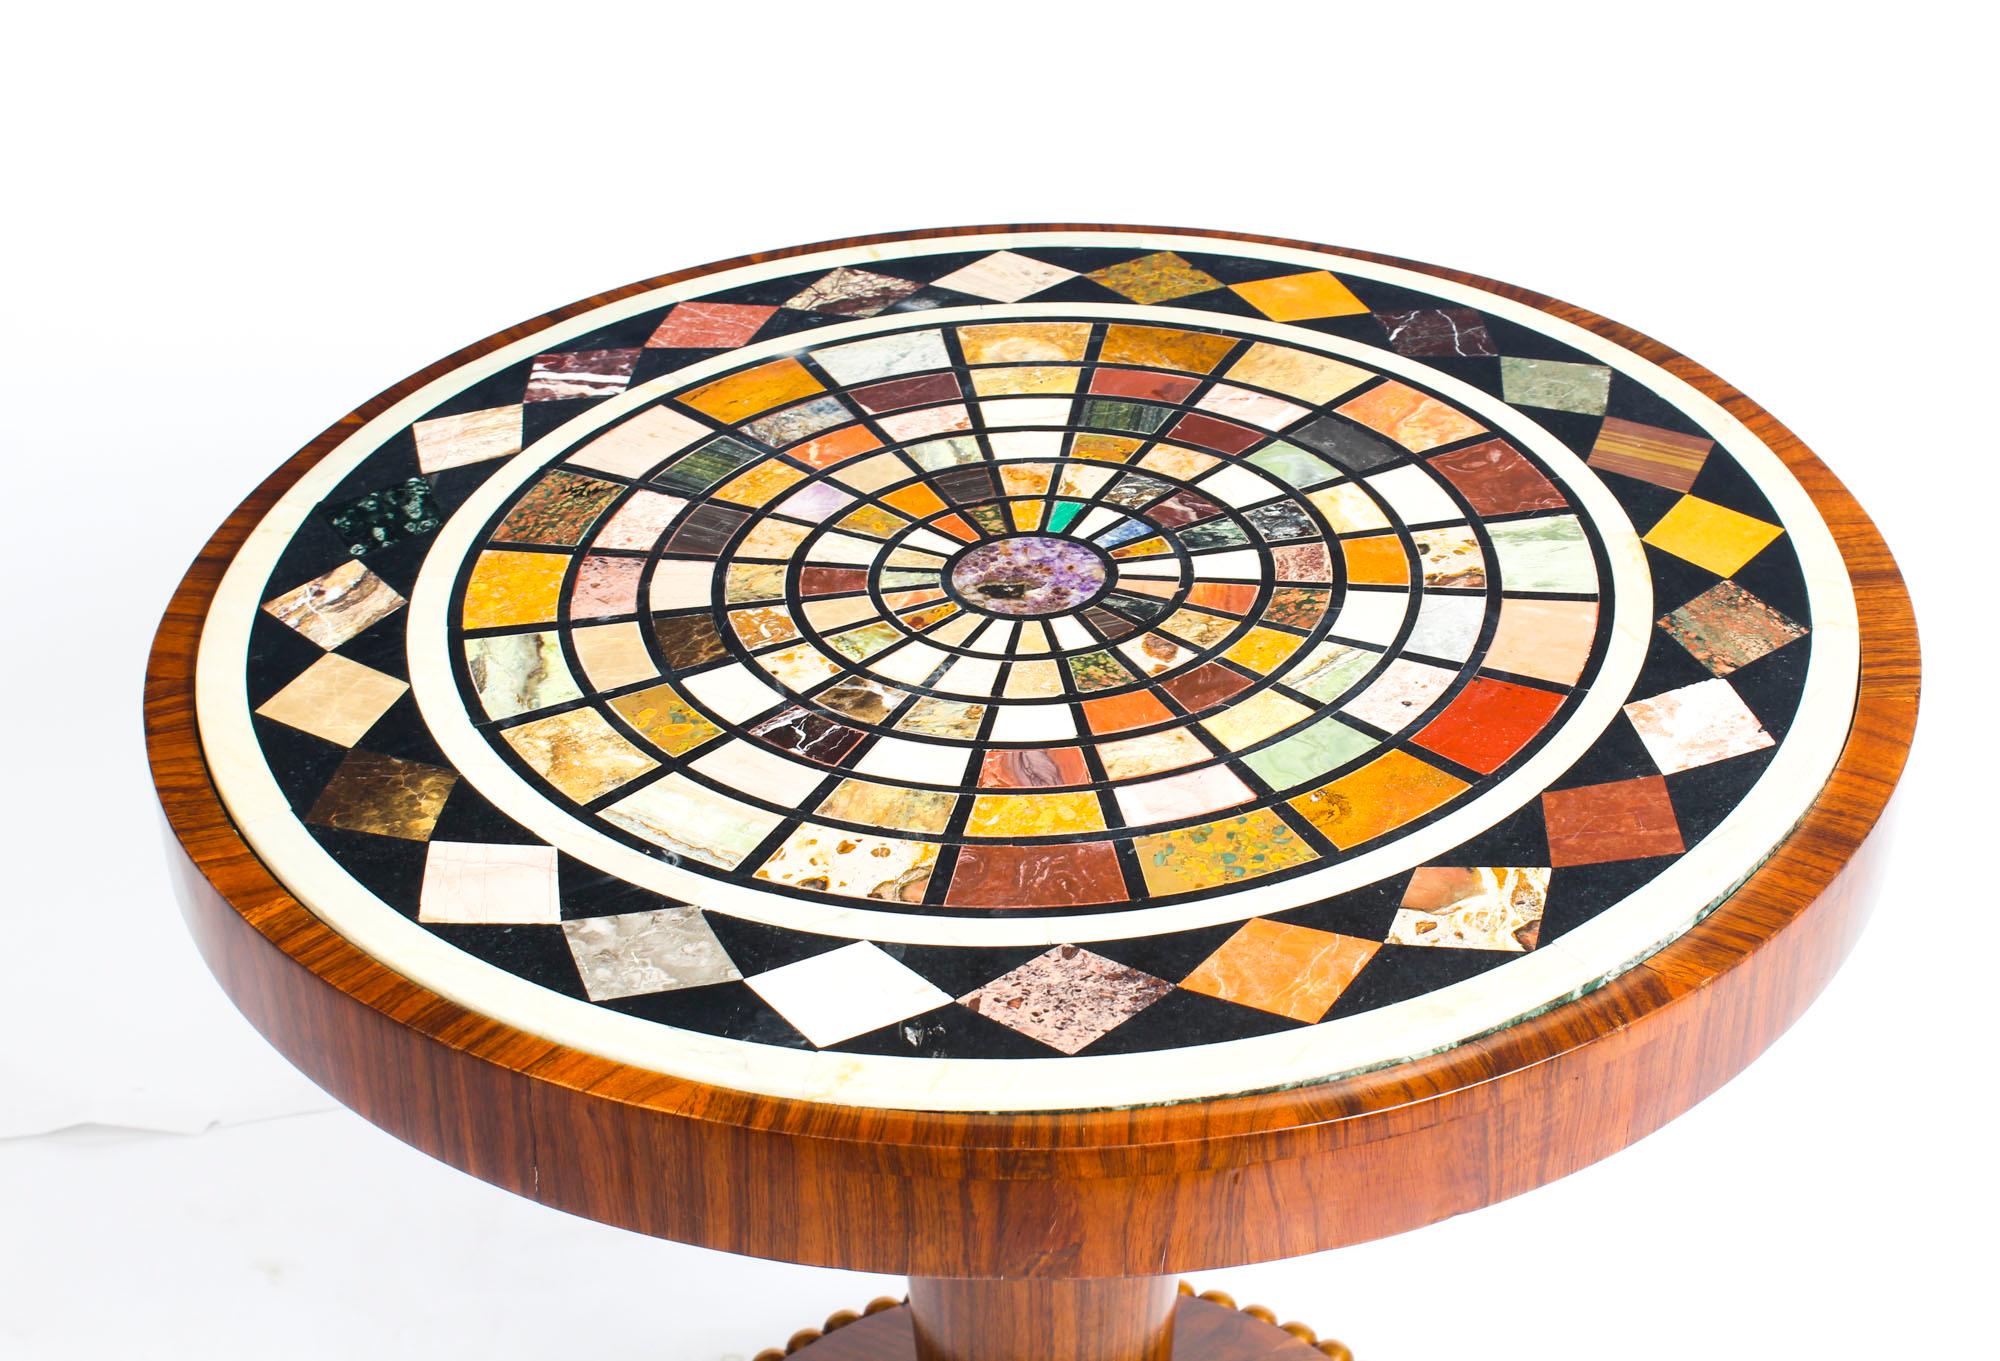 This is a superb antique William IV Gonçalo alves occasional table, circa 1830 in date, with a later inset pietra dura circular marble top, inlaid with radiating bands of specimen stones.

The Gonçalo alves ebonized & gilt centre table is inset